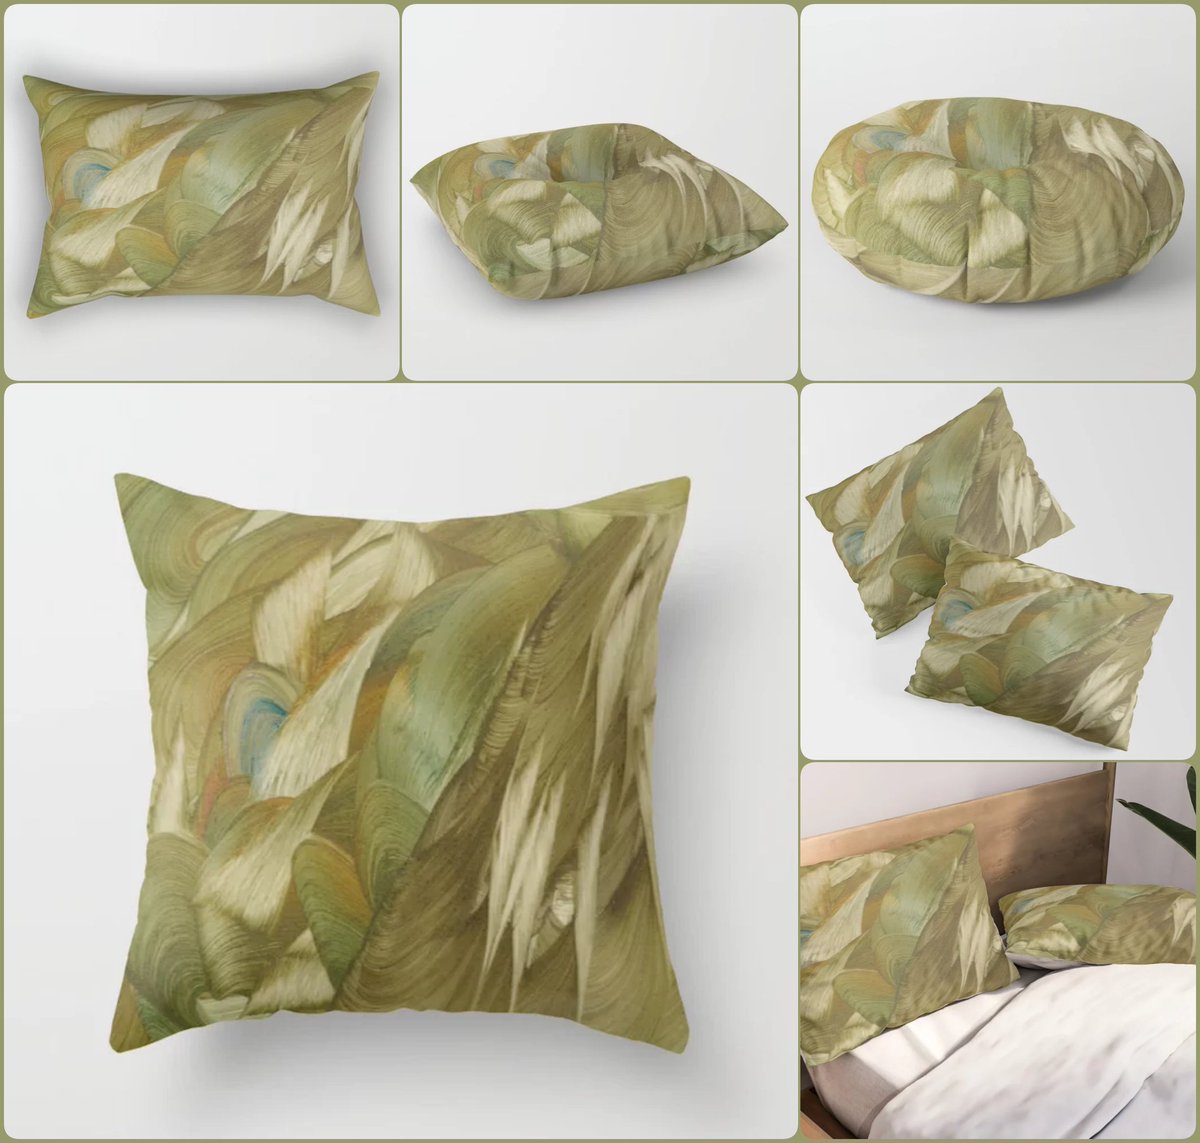 Zababa Throw Pillow~by Art Falaxy~
~Unique Pillows!~
#artfalaxy #art #bedroom #pillows #homedecor #society6 #Society6max #swirls #modern #trendy #accessories #accents #floorpillows #pillows #shams #blankets

society6.com/product/sevent…
COLLECTION: society6.com/art/seventeent…